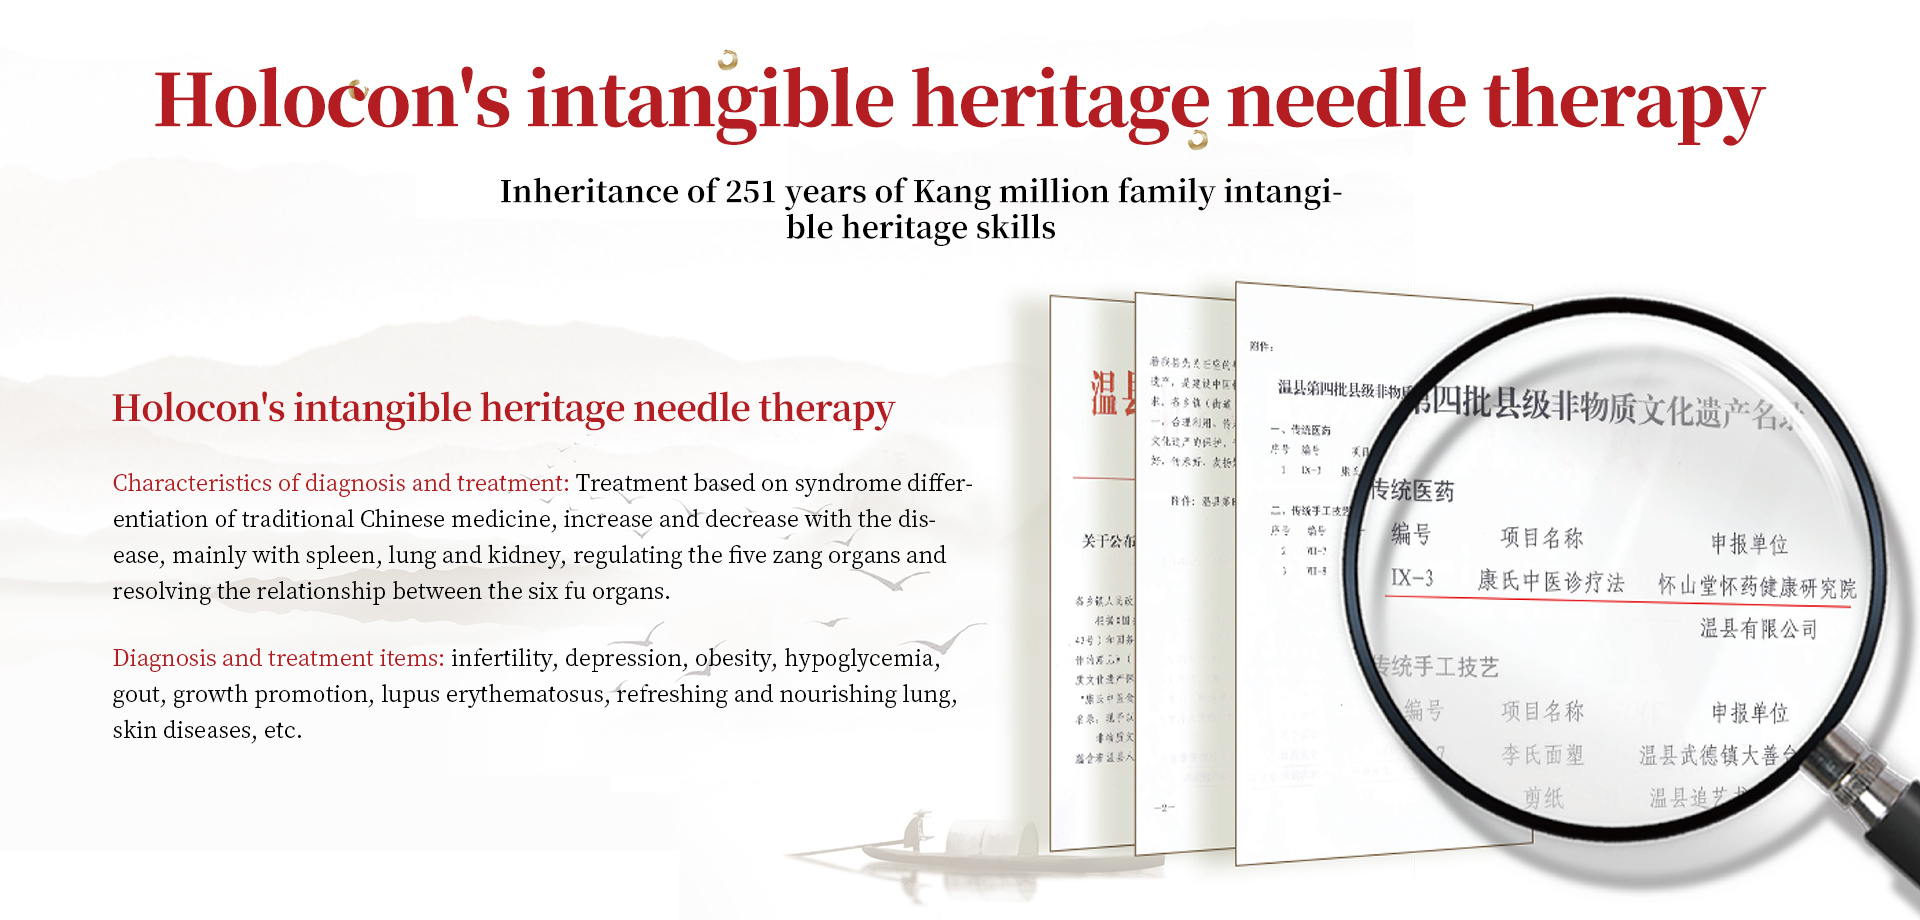 Holocon's intangible heritage diagnosis and treatment